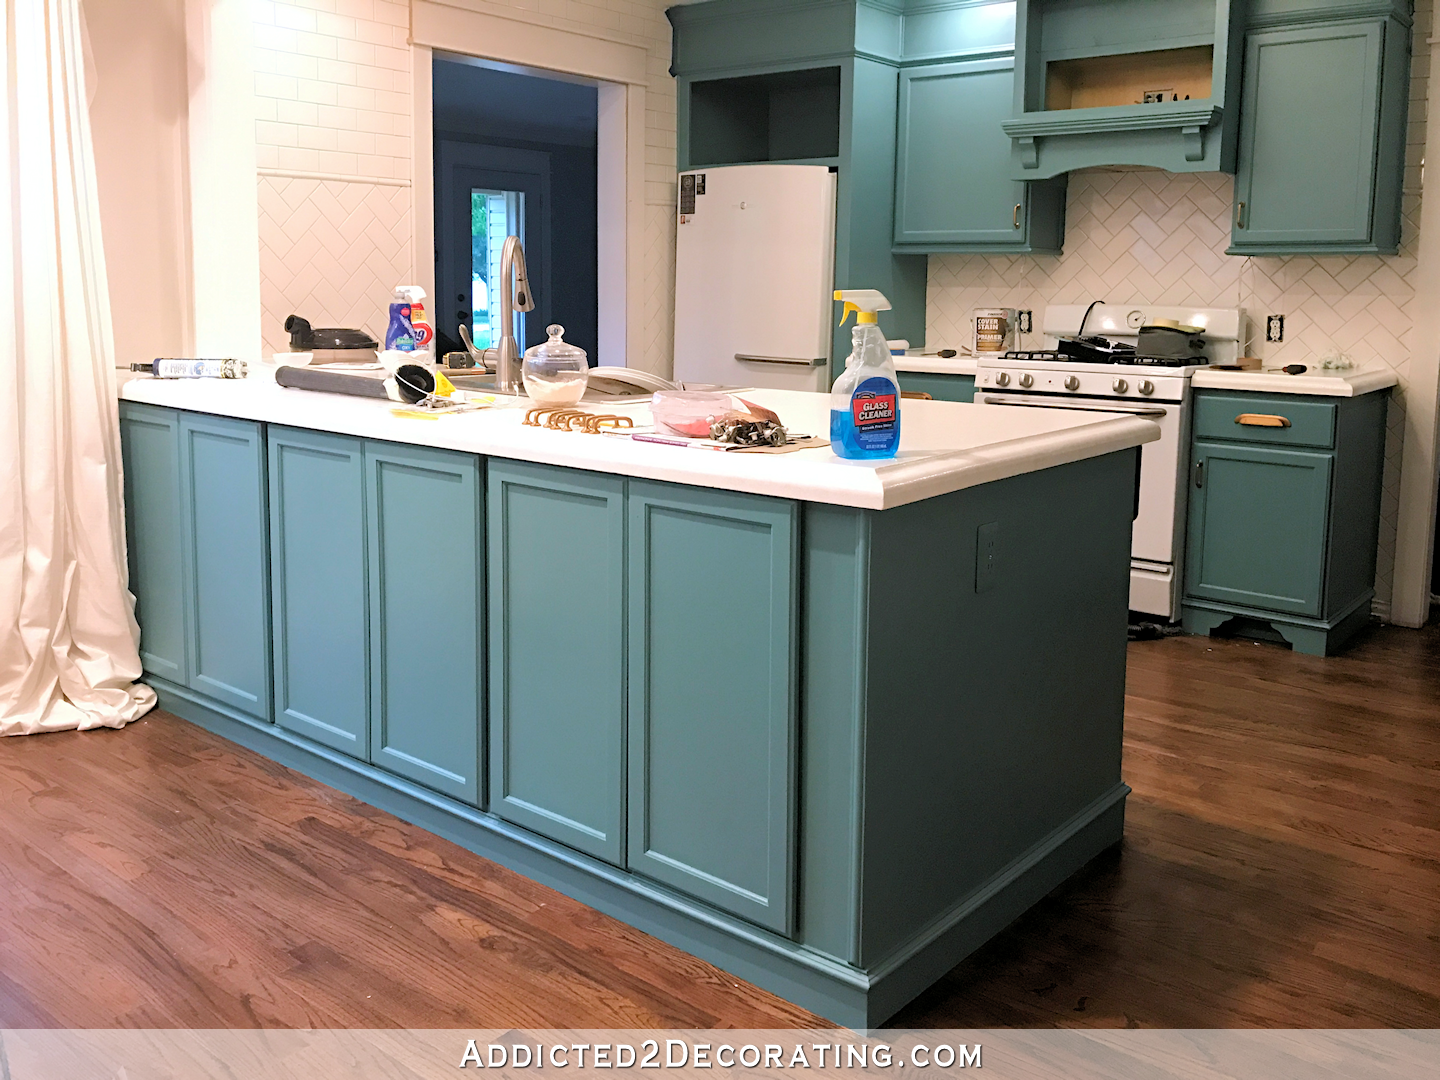 teal kitchen cabinets - breakfast room side of peninsula